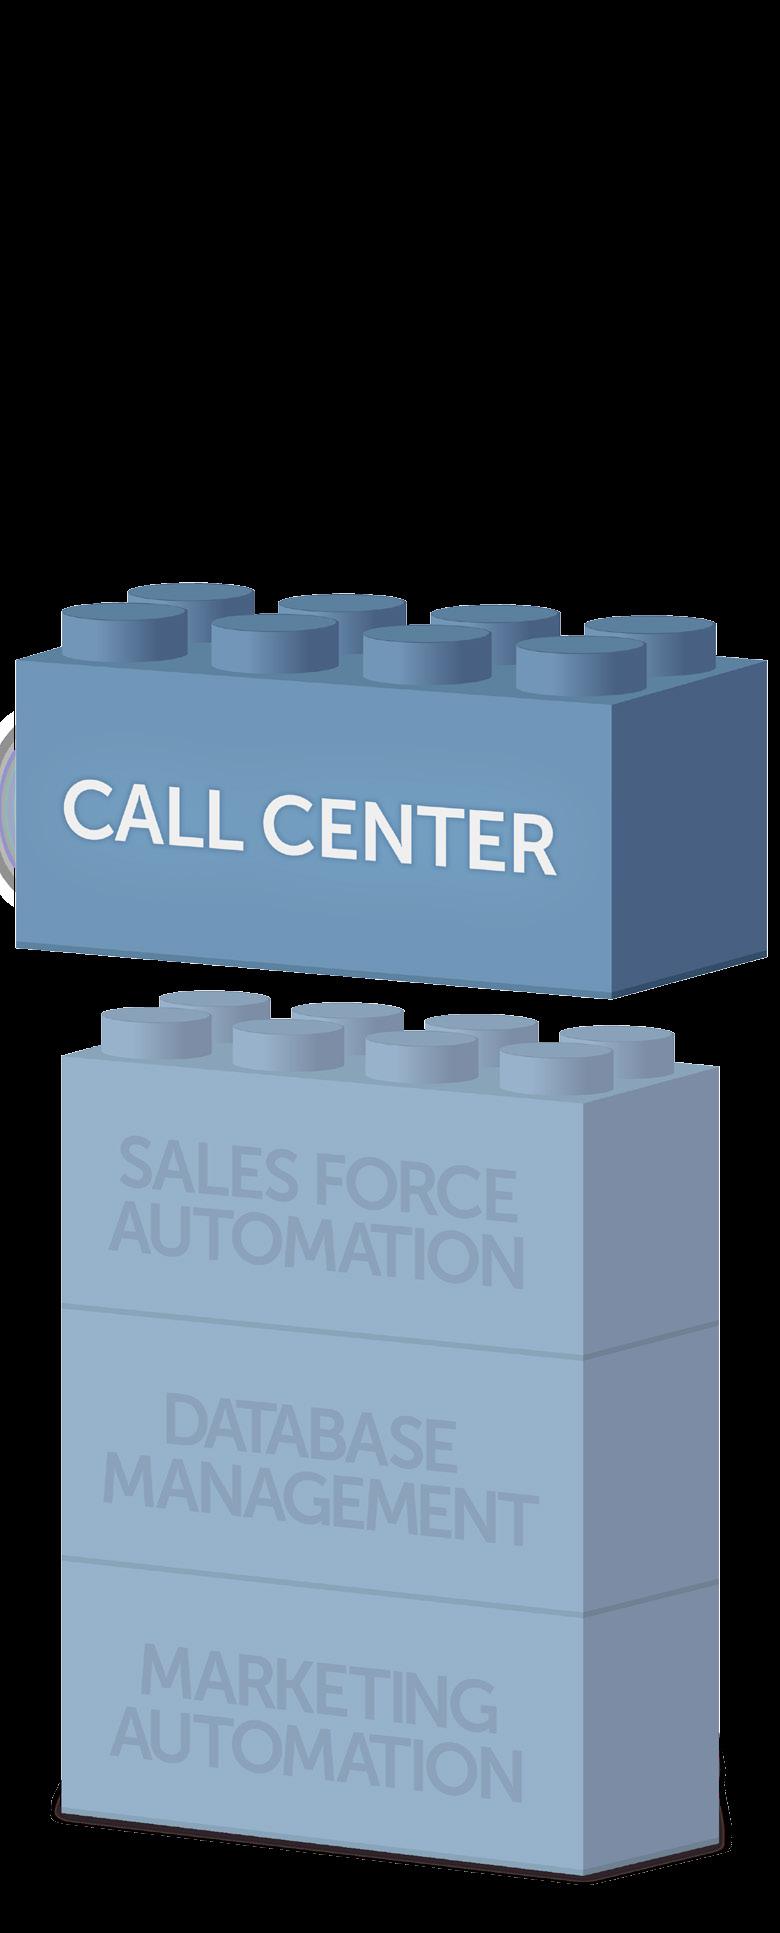 If you have a call center qualifying leads before handing them off to your sales team, you need software that facilitates fast, accurate lead qualification with higher conversion rates.